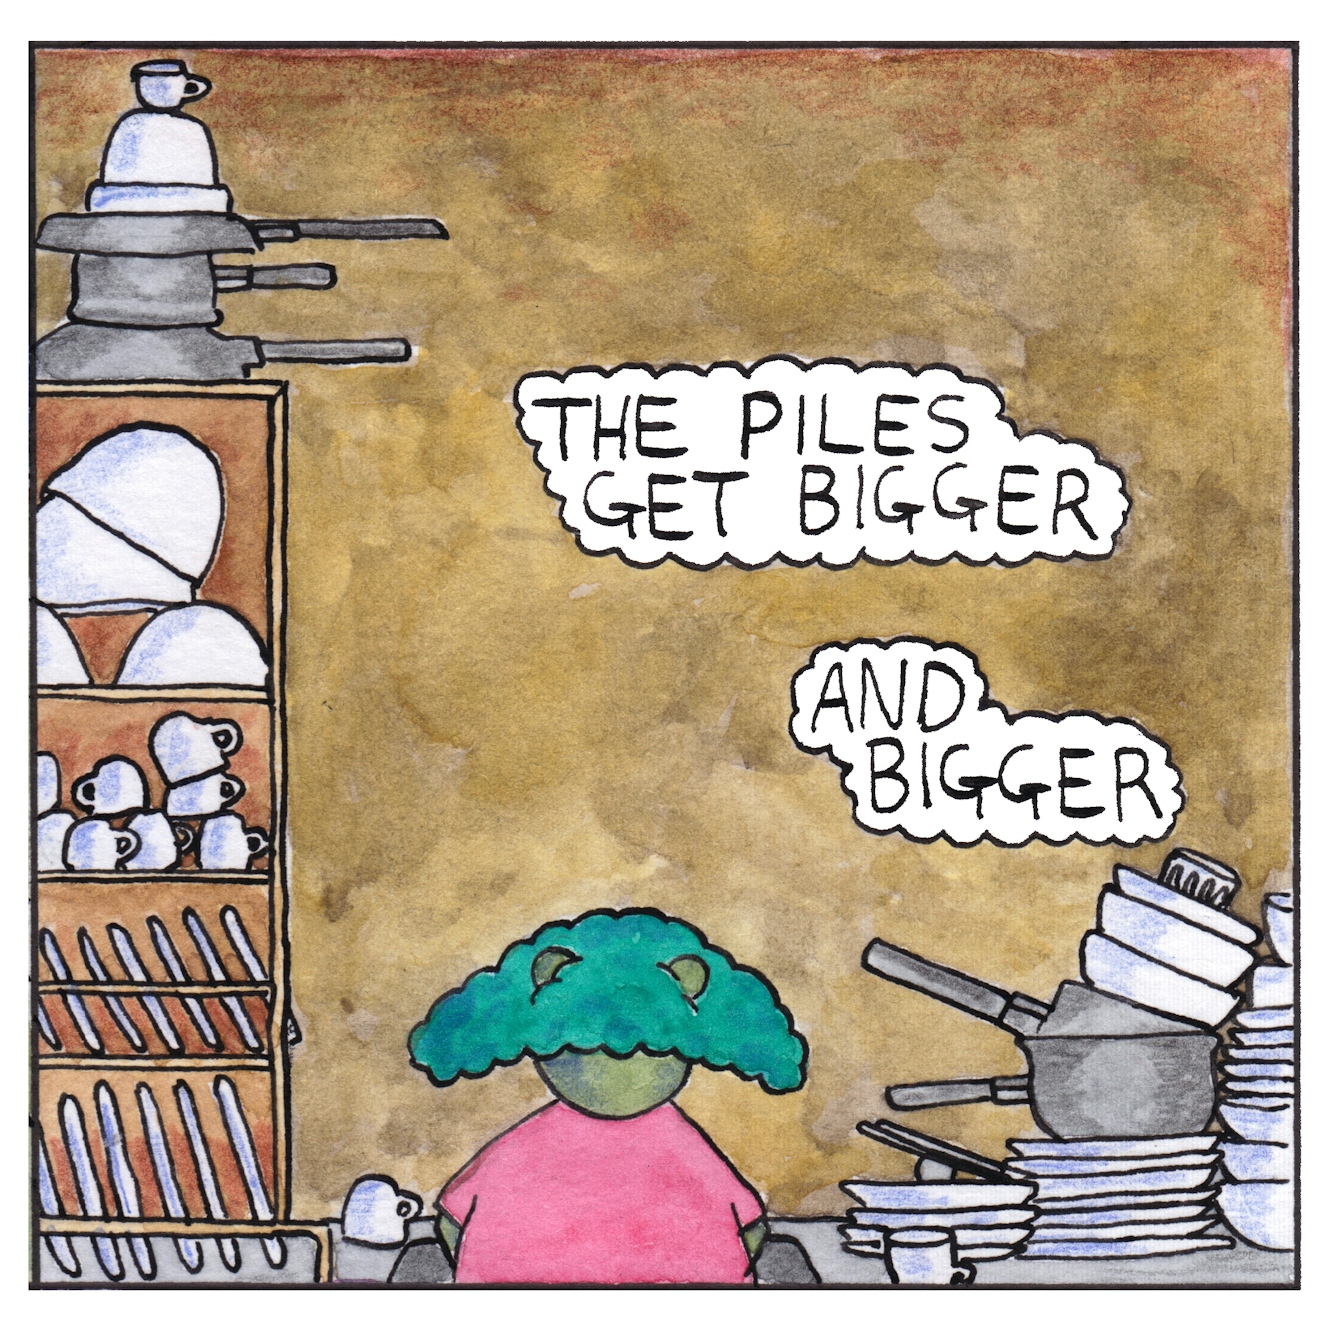 Panel 4 of a six-panel comic made with ink, watercolour and colour pencils: The mouse is seen from behind, still standing at the sink washing dishes. A small figure in the panel. To their right are wobbly stacks of dirty dishes and pans. To their left are methodically arranged clean dishes and pans stacked in shelves three times the height of the mouse. Two text bubbles above the mouse read: “The piles get bigger and bigger”